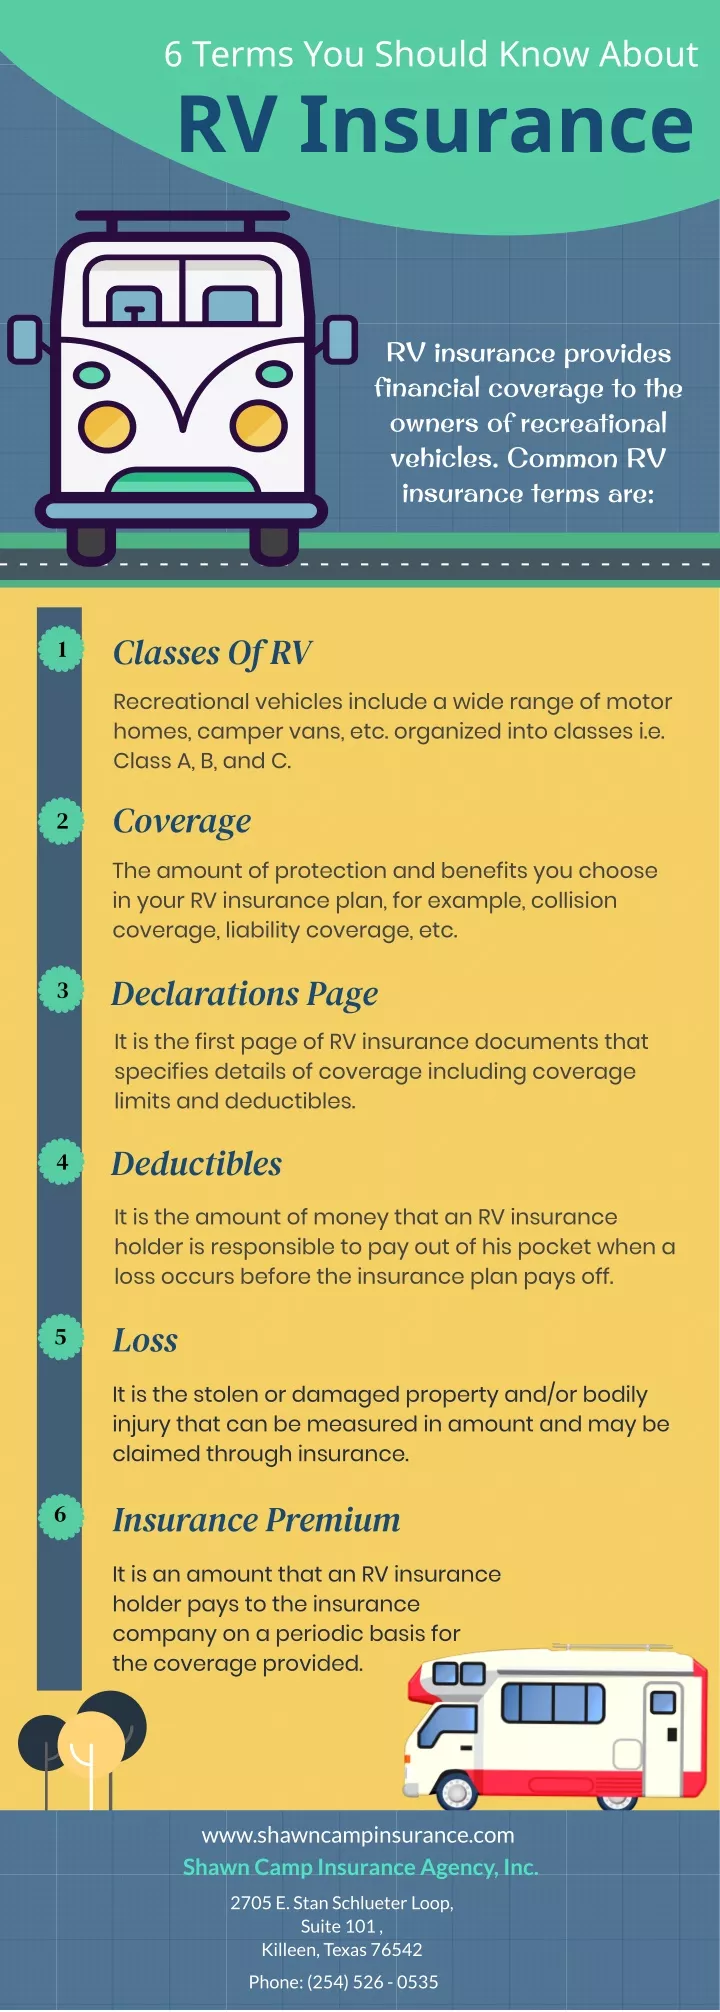 6 terms you should know about rv insurance